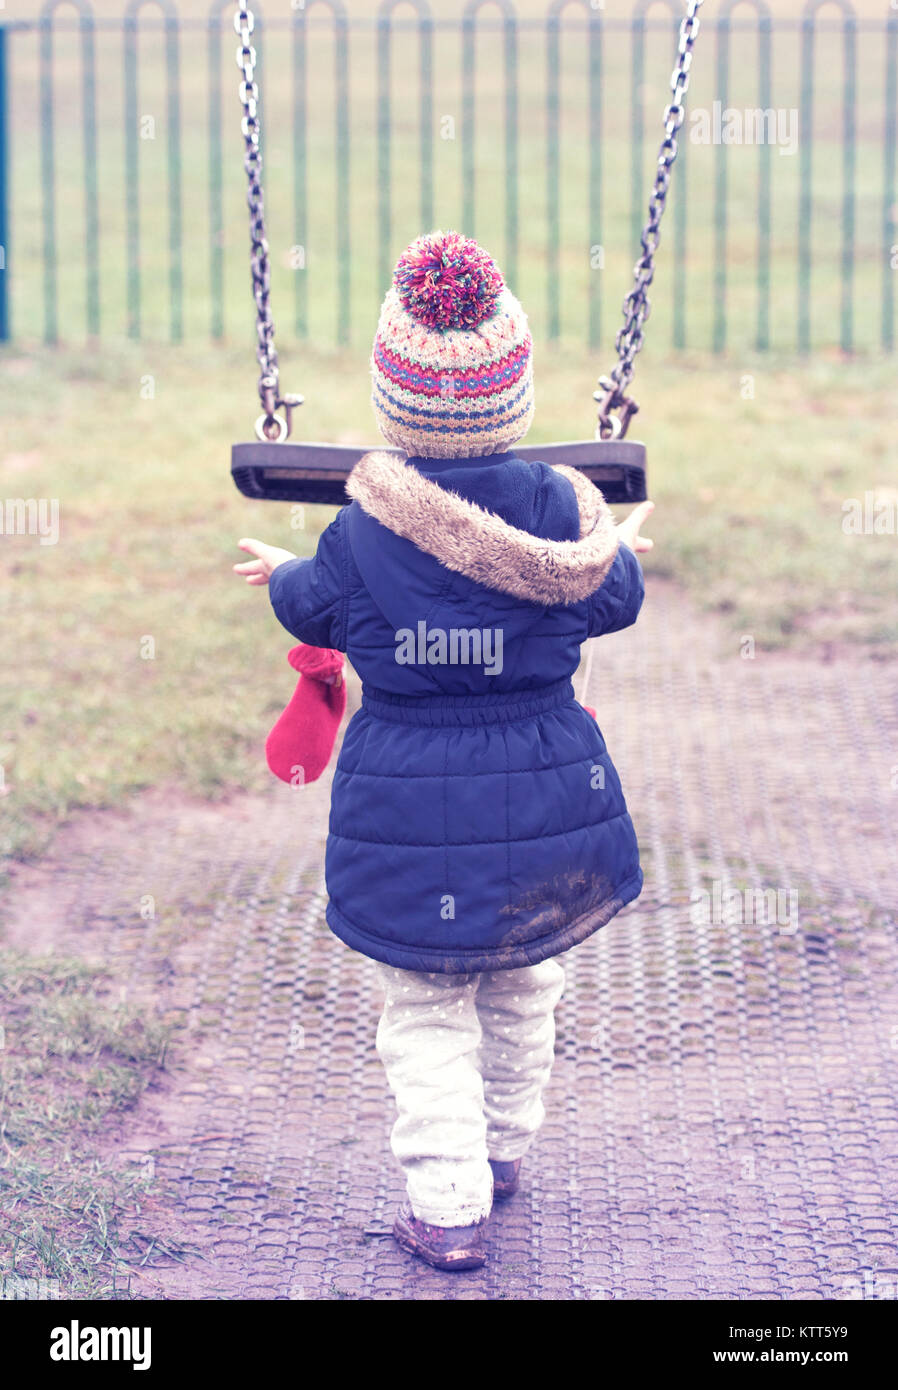 Girl pushing a swing in a playground Stock Photo